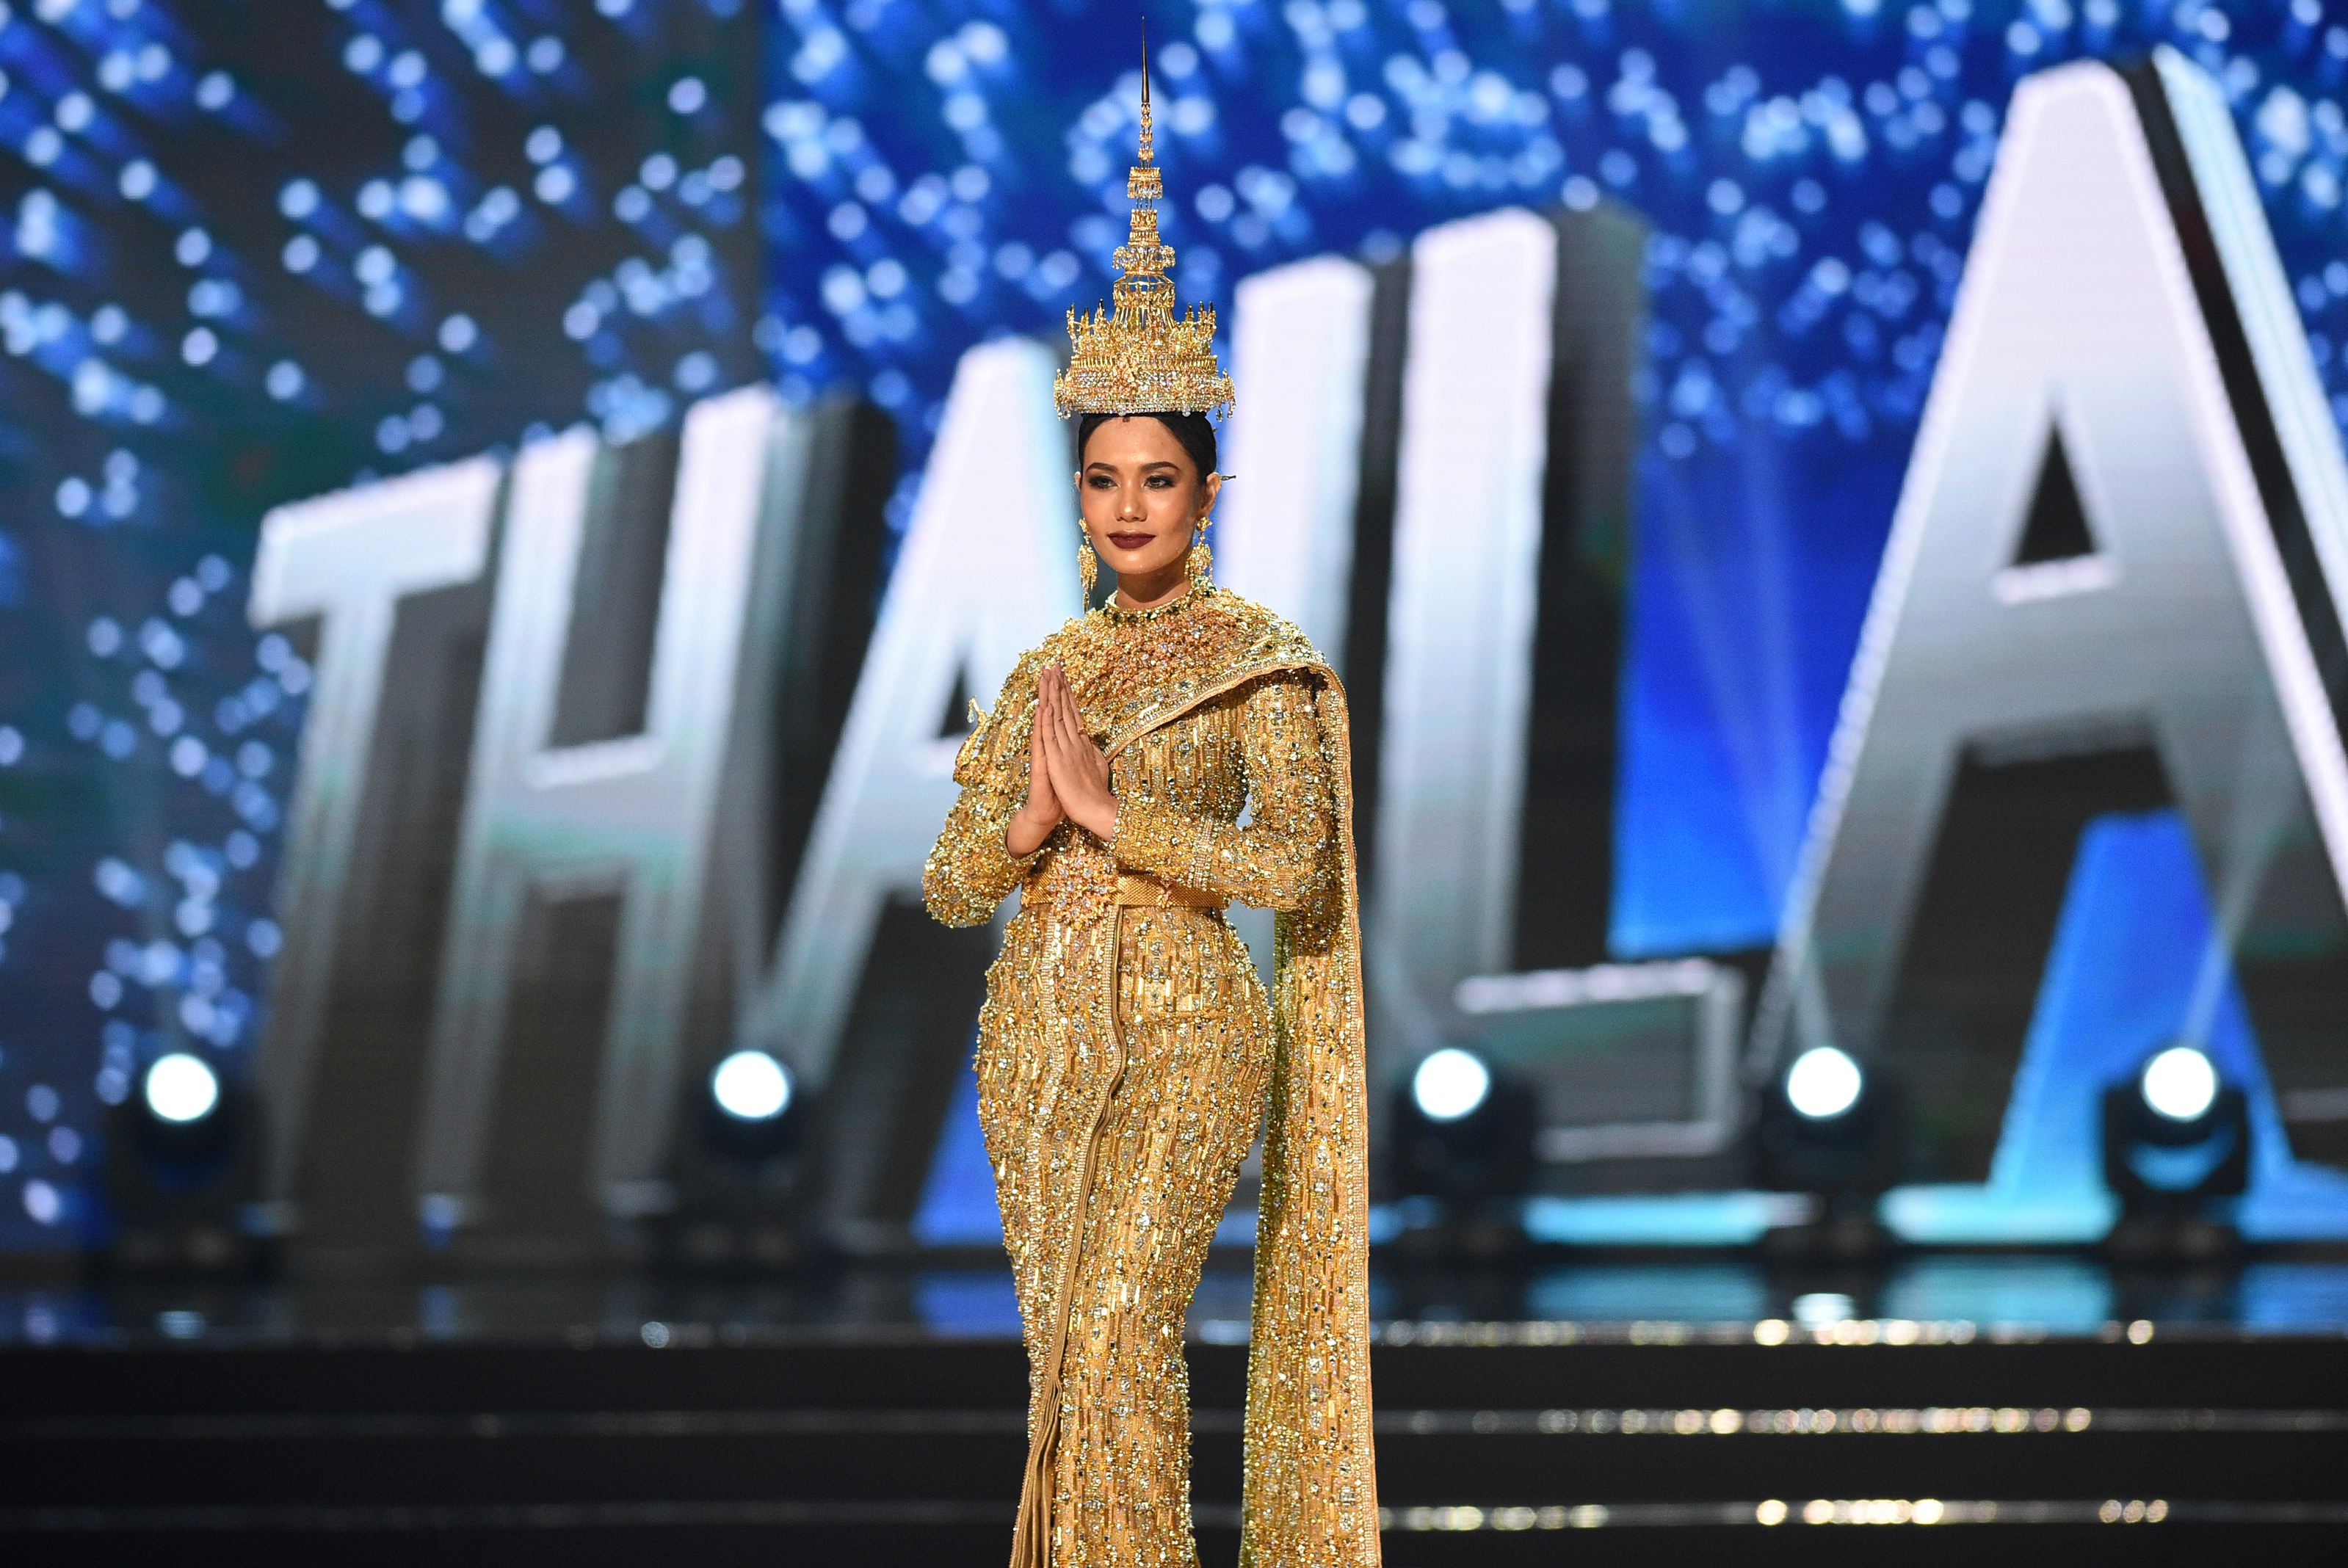 This photo taken on January 26, 2017 shows Miss Universe contestant Chalita Suansane of Thailand during the national costume presentation in the preliminary competition of the Miss Universe pageant at the Mall of Asia arena in Manila. The Miss Universe beauty pageant coronation will take place on January 30. / AFP PHOTO / TED ALJIBE